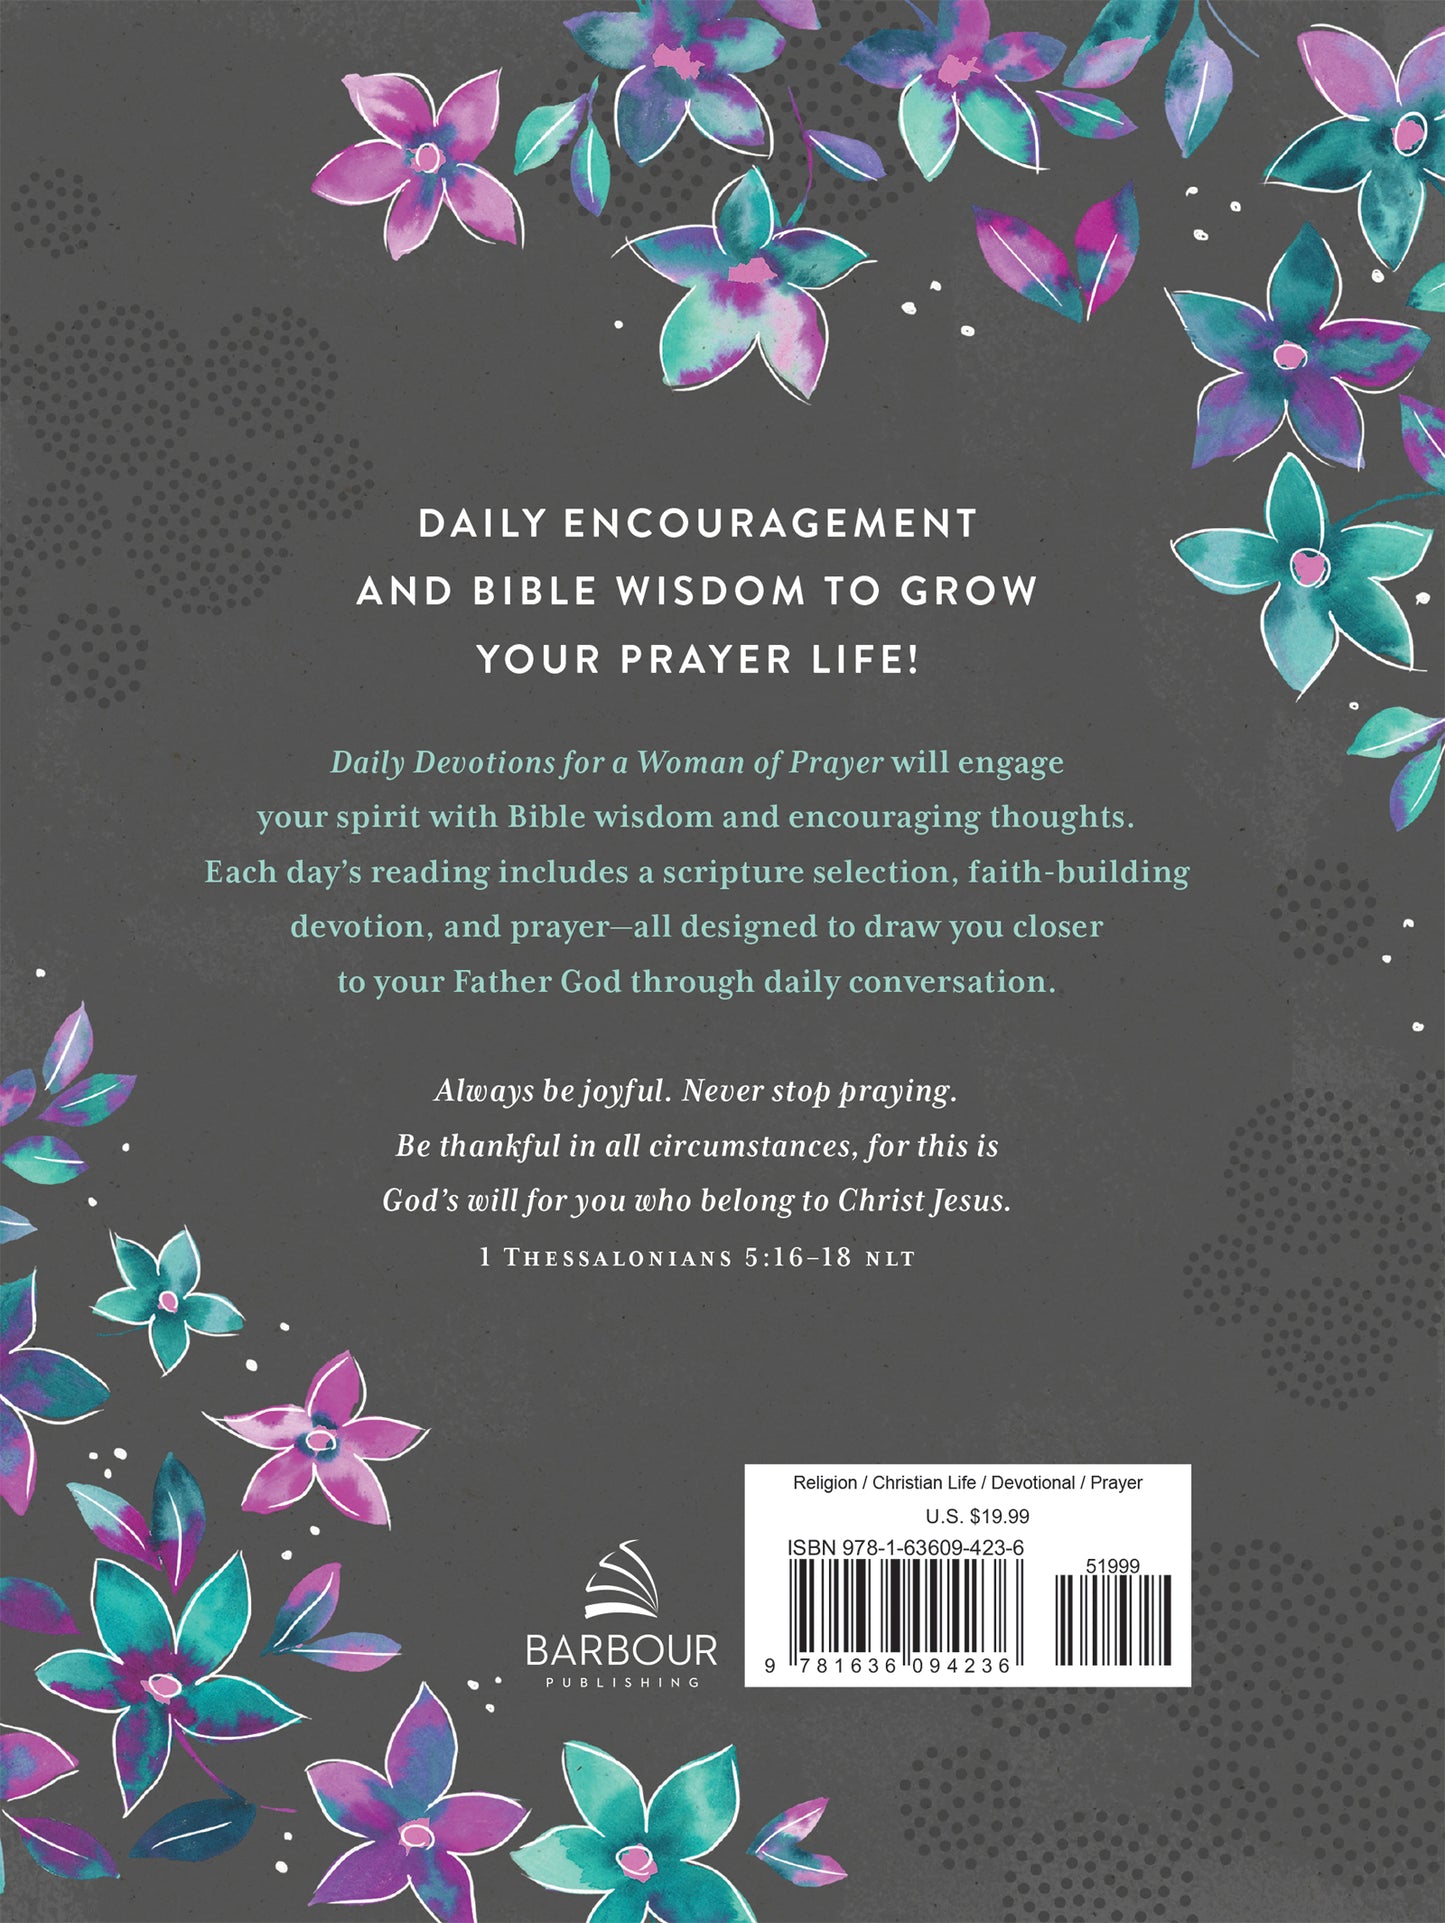 Daily Devotions for a Woman of Prayer